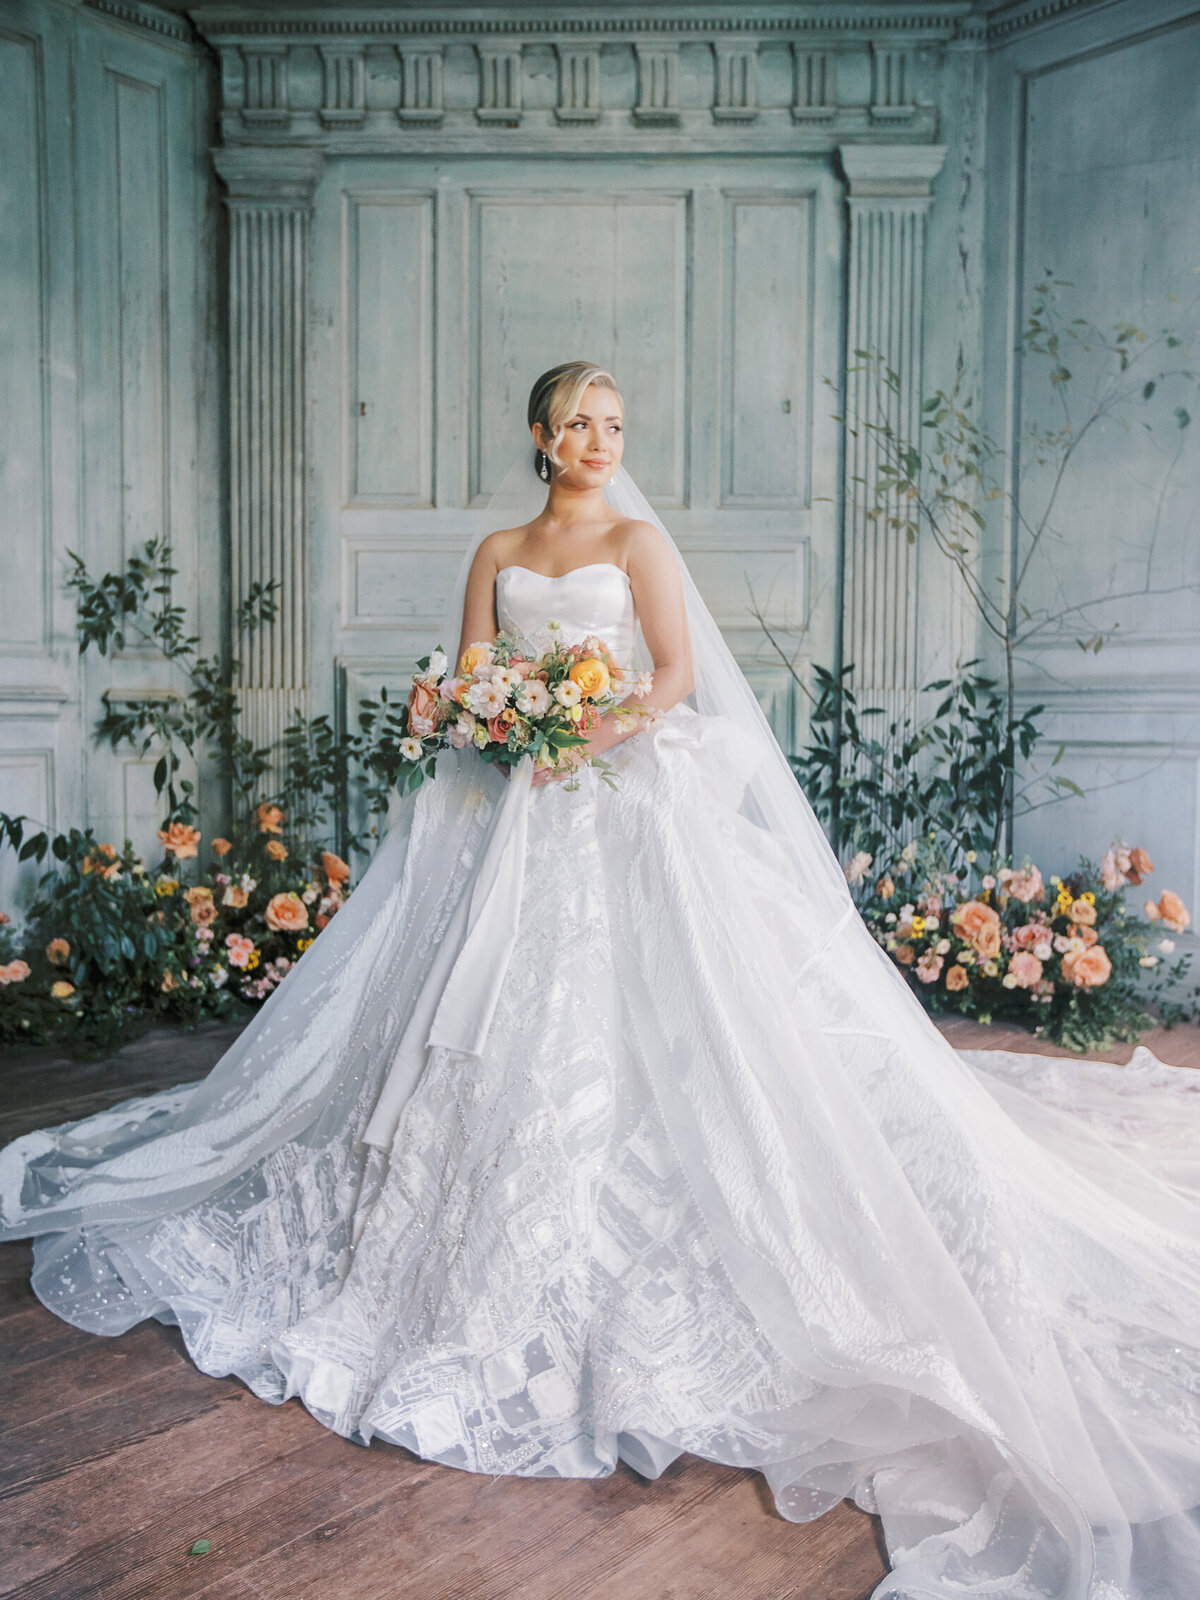 Jenny-Haas-Photography-Luxury-DC-Planner-Prof-Jimmy-Choo-Wedding-Gown-Luxe-Bouquet